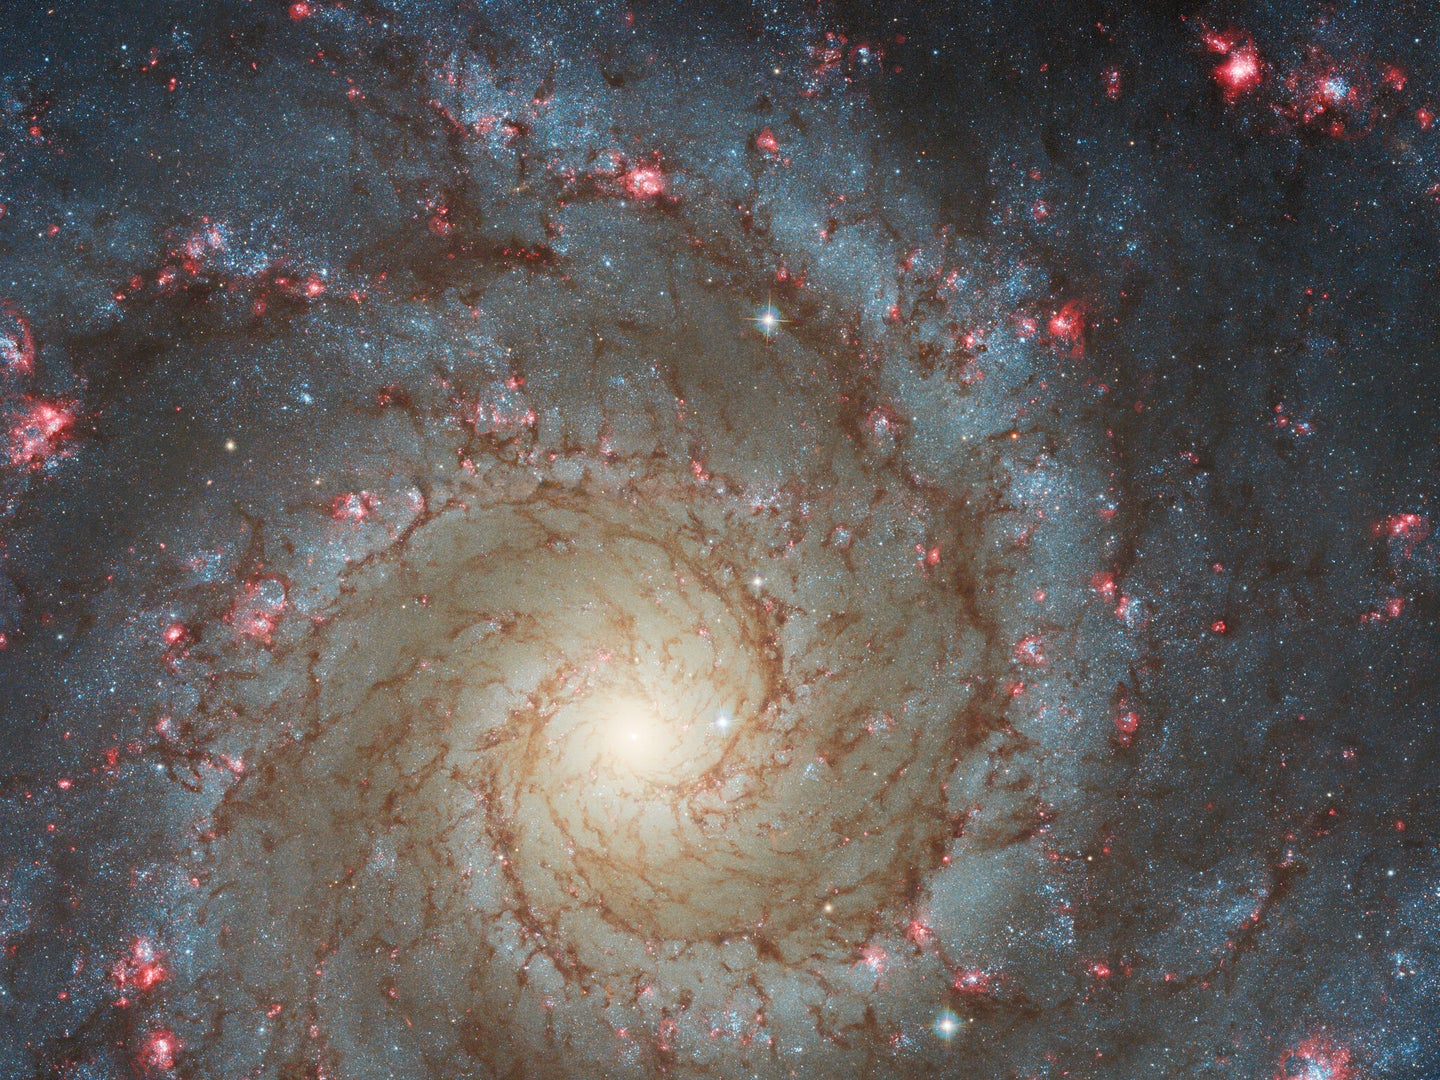 Spiral galaxy M74, with  rosy pink regions of fresh star formation.